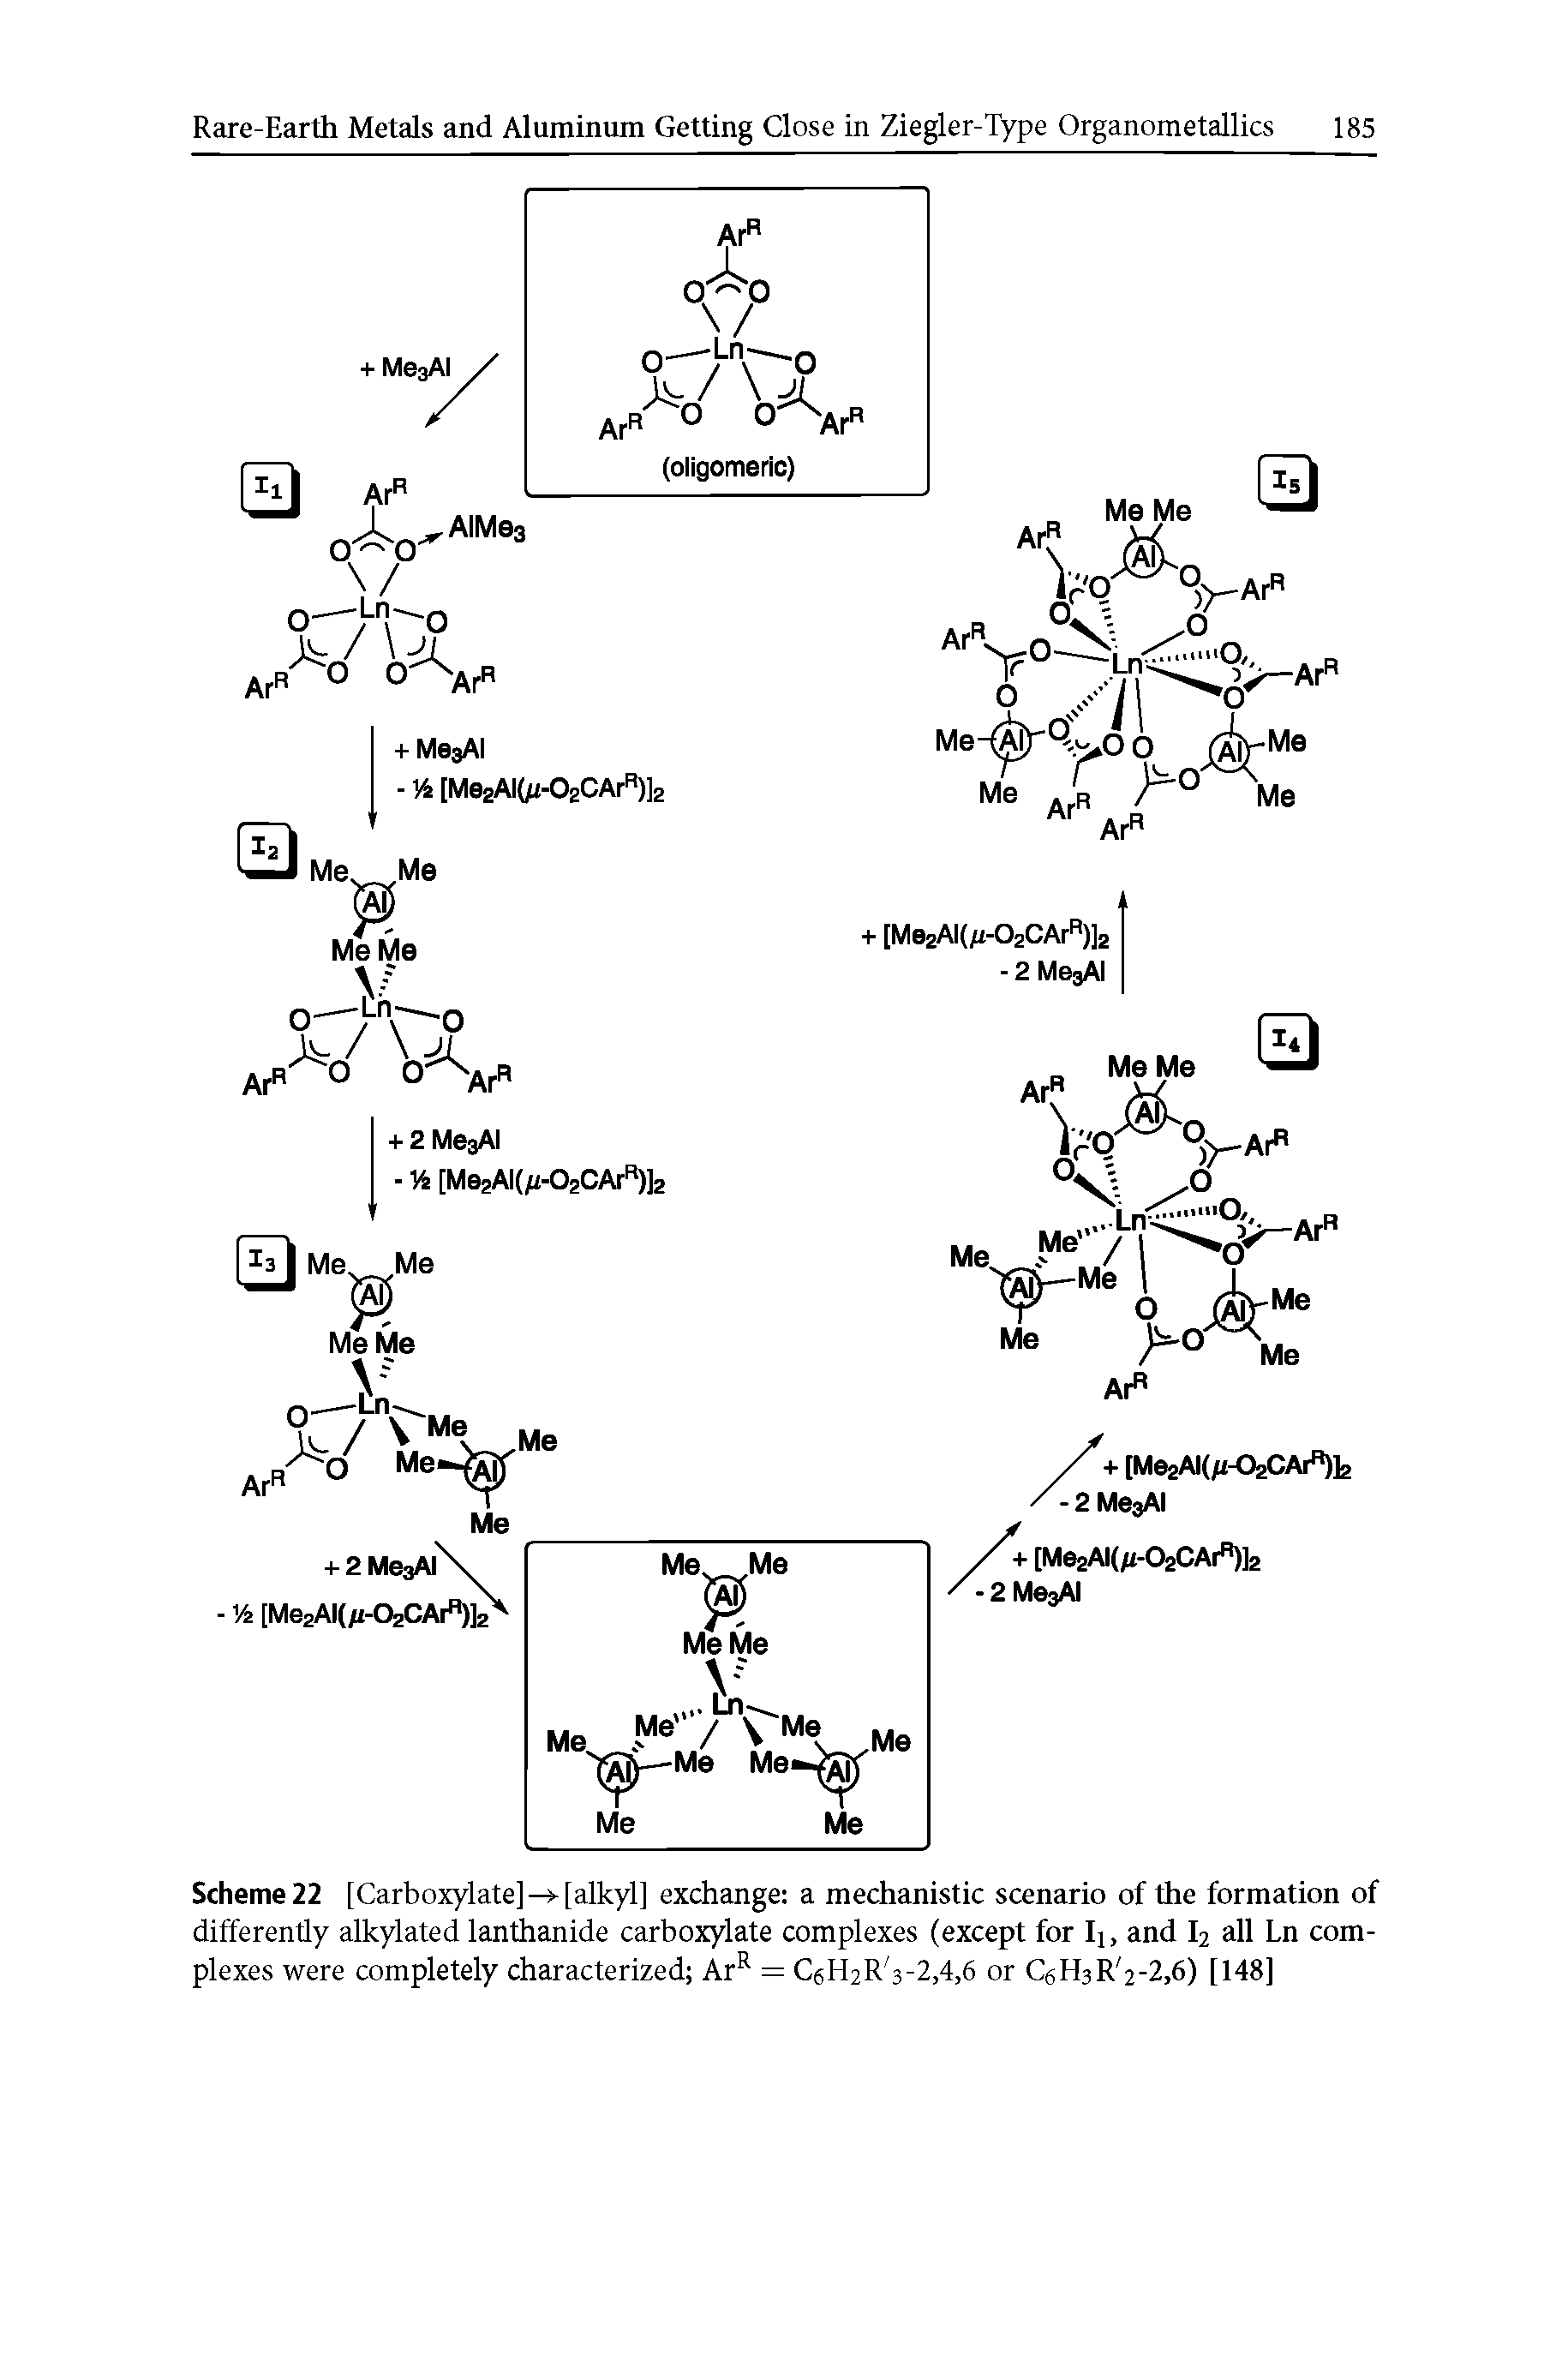 Scheme 22 [Carboxylate]- -[alkyl] exchange a mechanistic scenario of the formation of differently alkylated lanthanide carboxylate complexes (except for Ij, and I2 all Ln complexes were completely characterized ArR = C6H2R 3-2,4,6 or C6H3R 2-2,6) [148]...